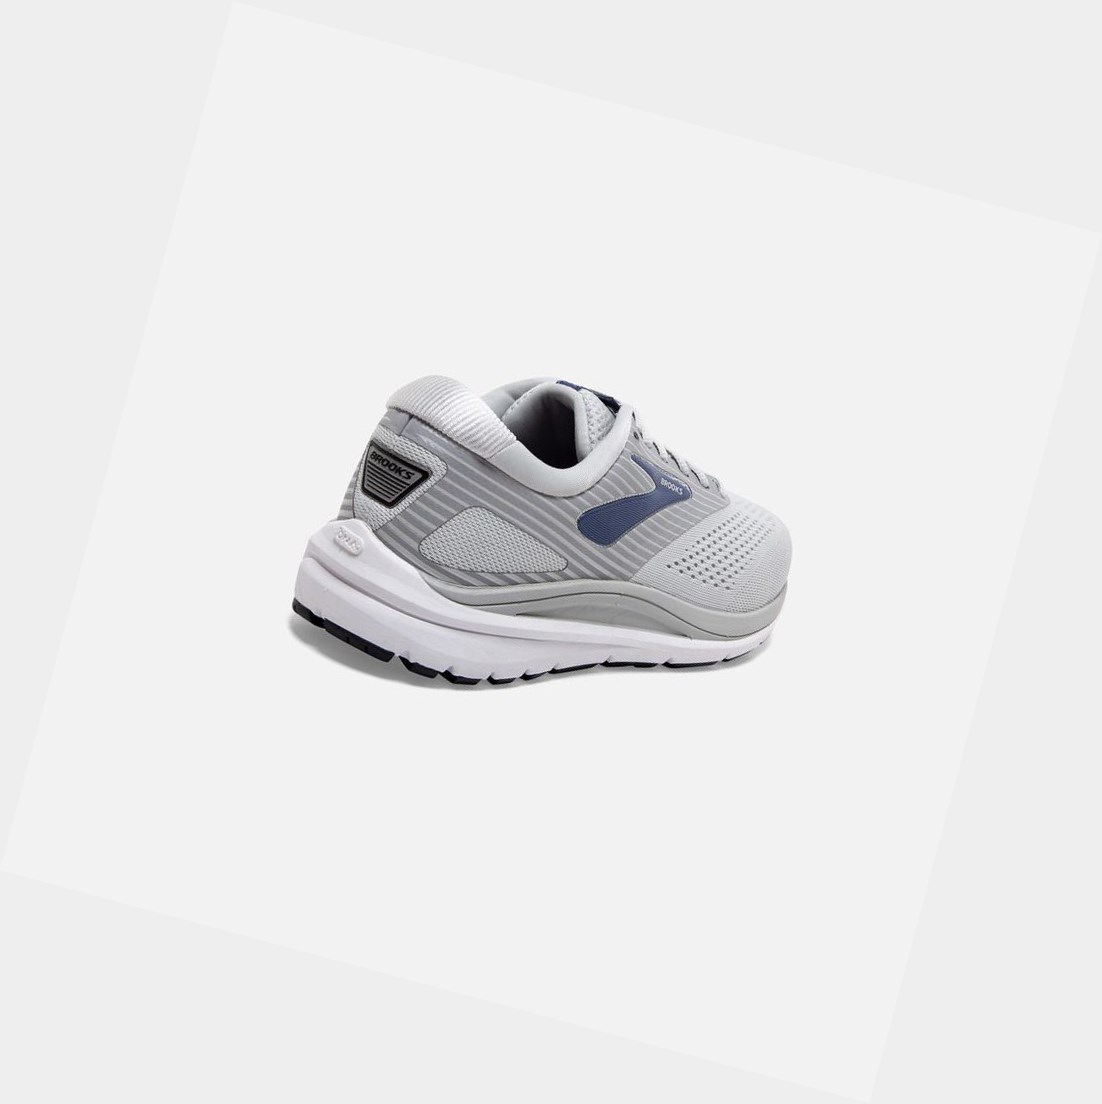 Brooks Addiction 14 Women's Road Running Shoes Oyster / Alloy / Marlin | YGUC-74361